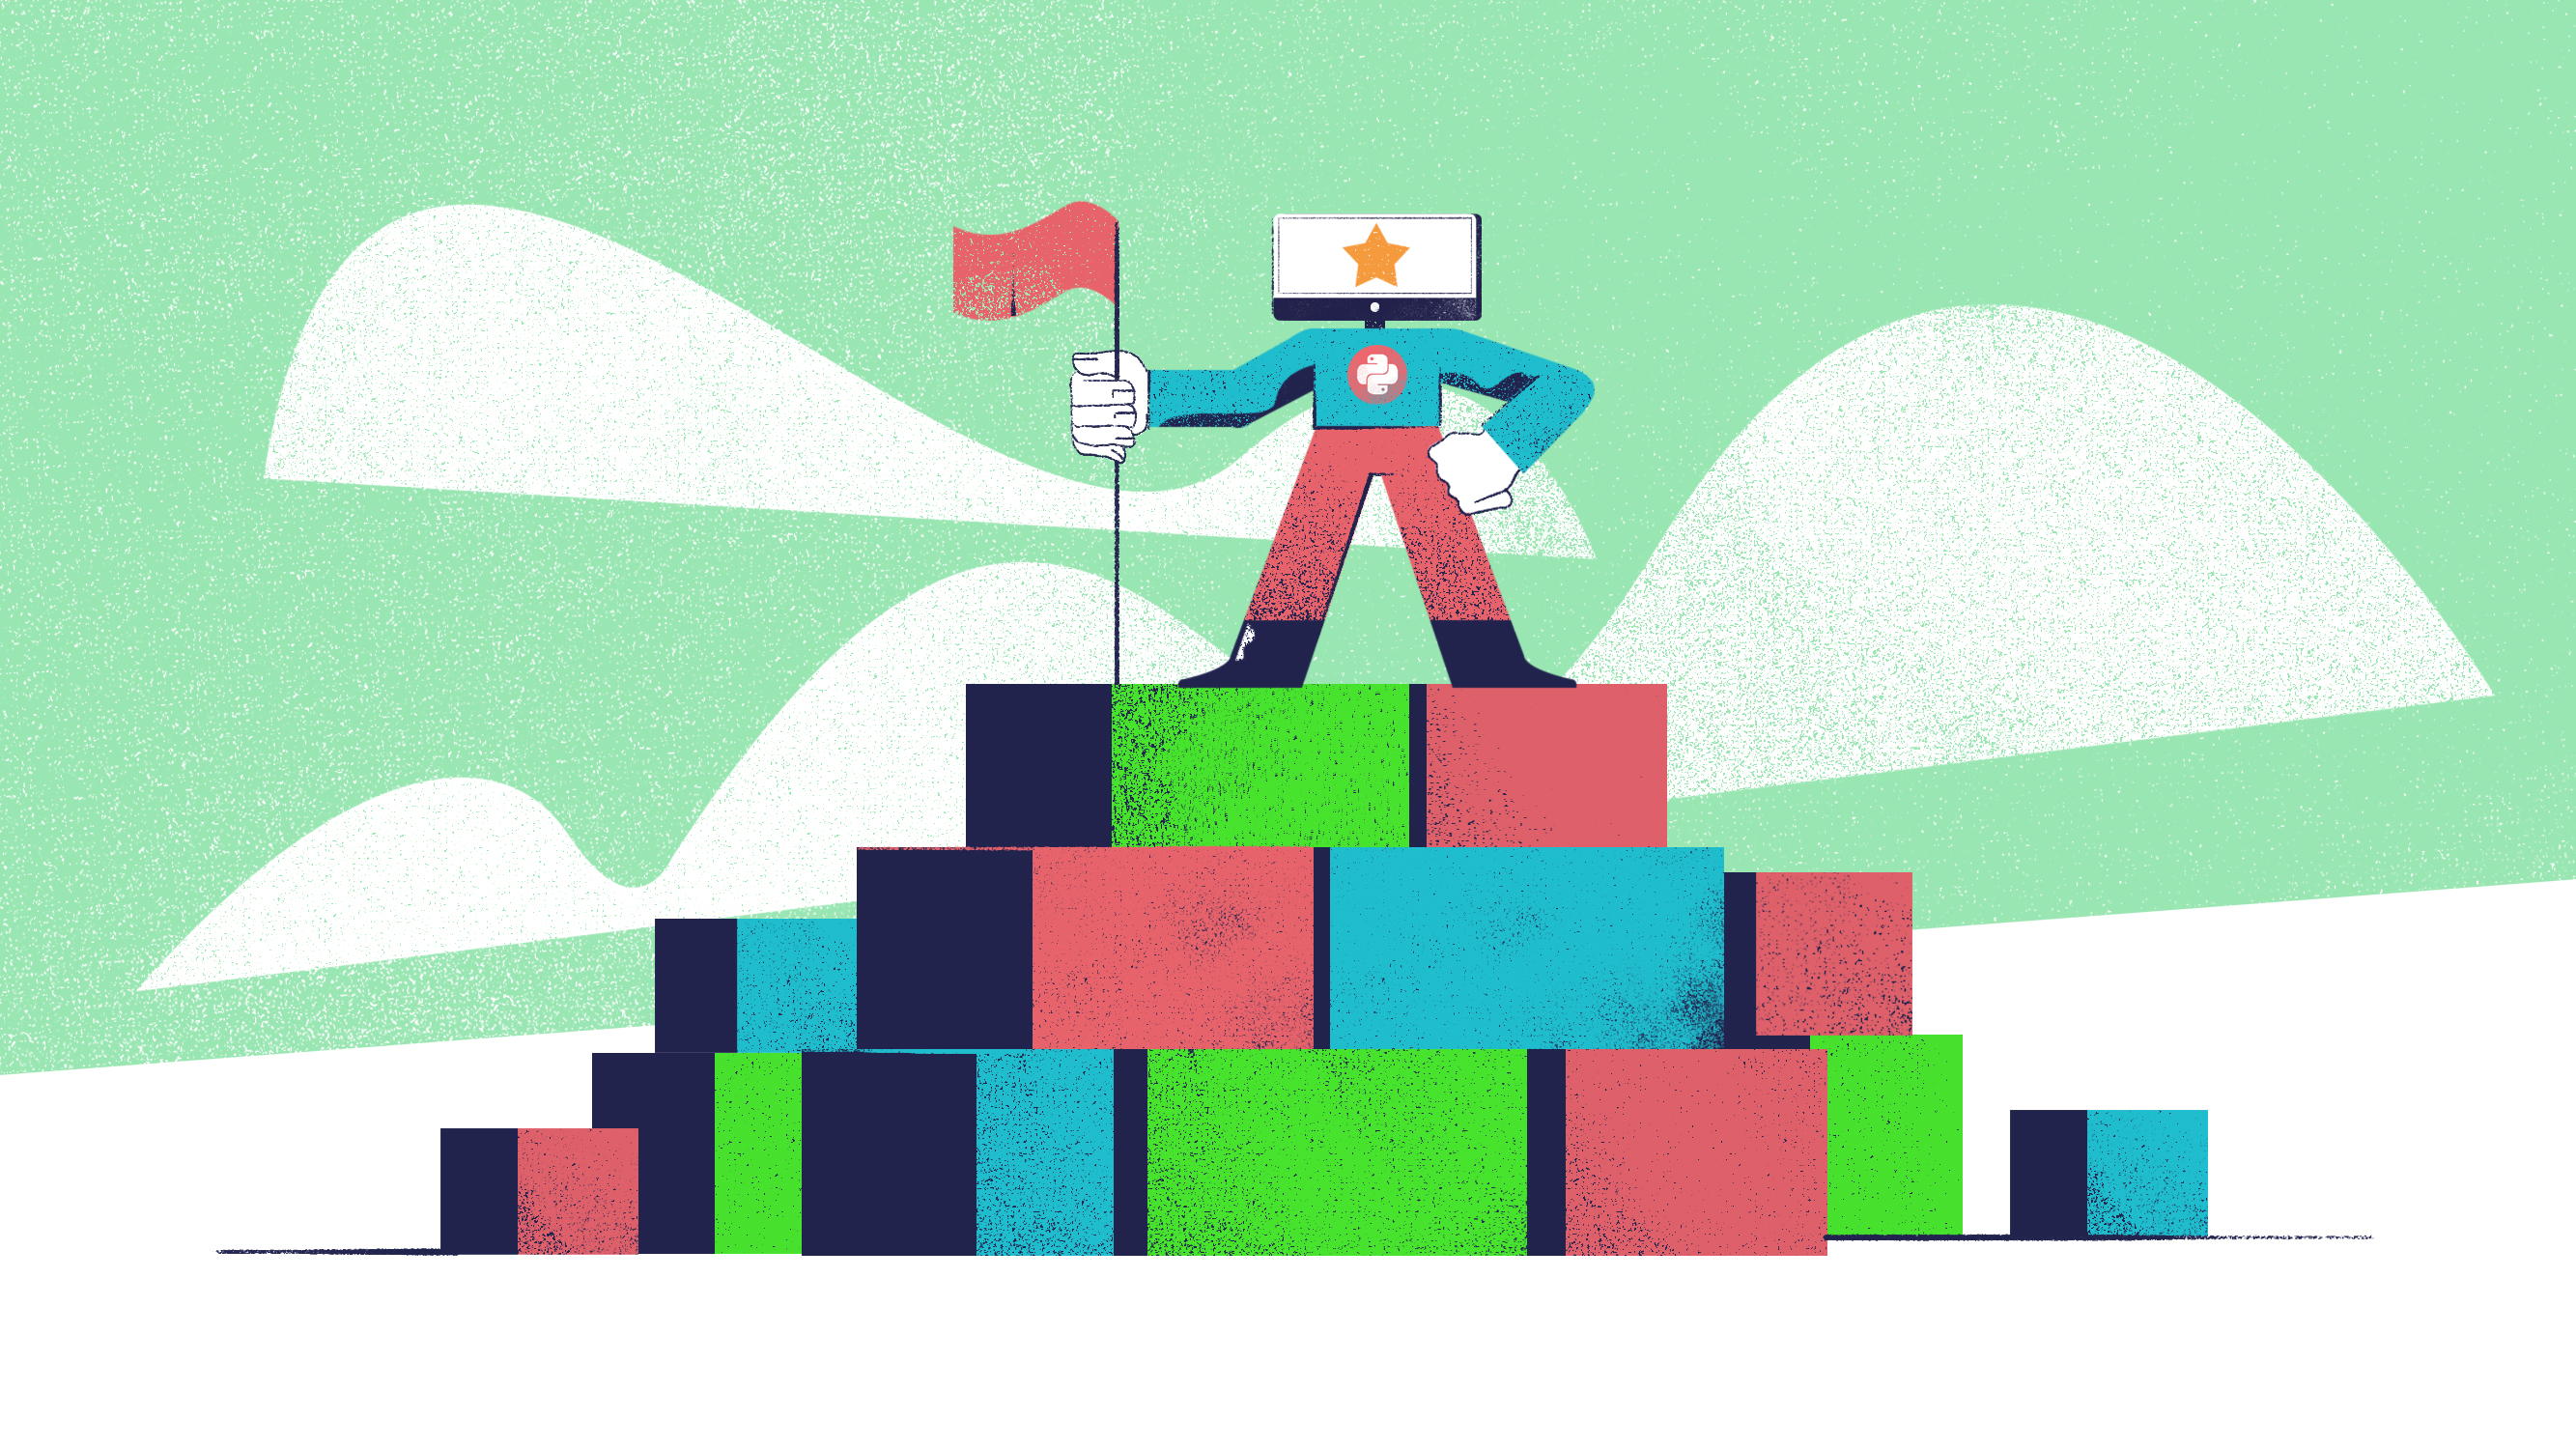 Python Guru planting a flag atop of a mountain made of abstract cubes, representing his progress in learning to code. With a light green background to match the day 14 image.